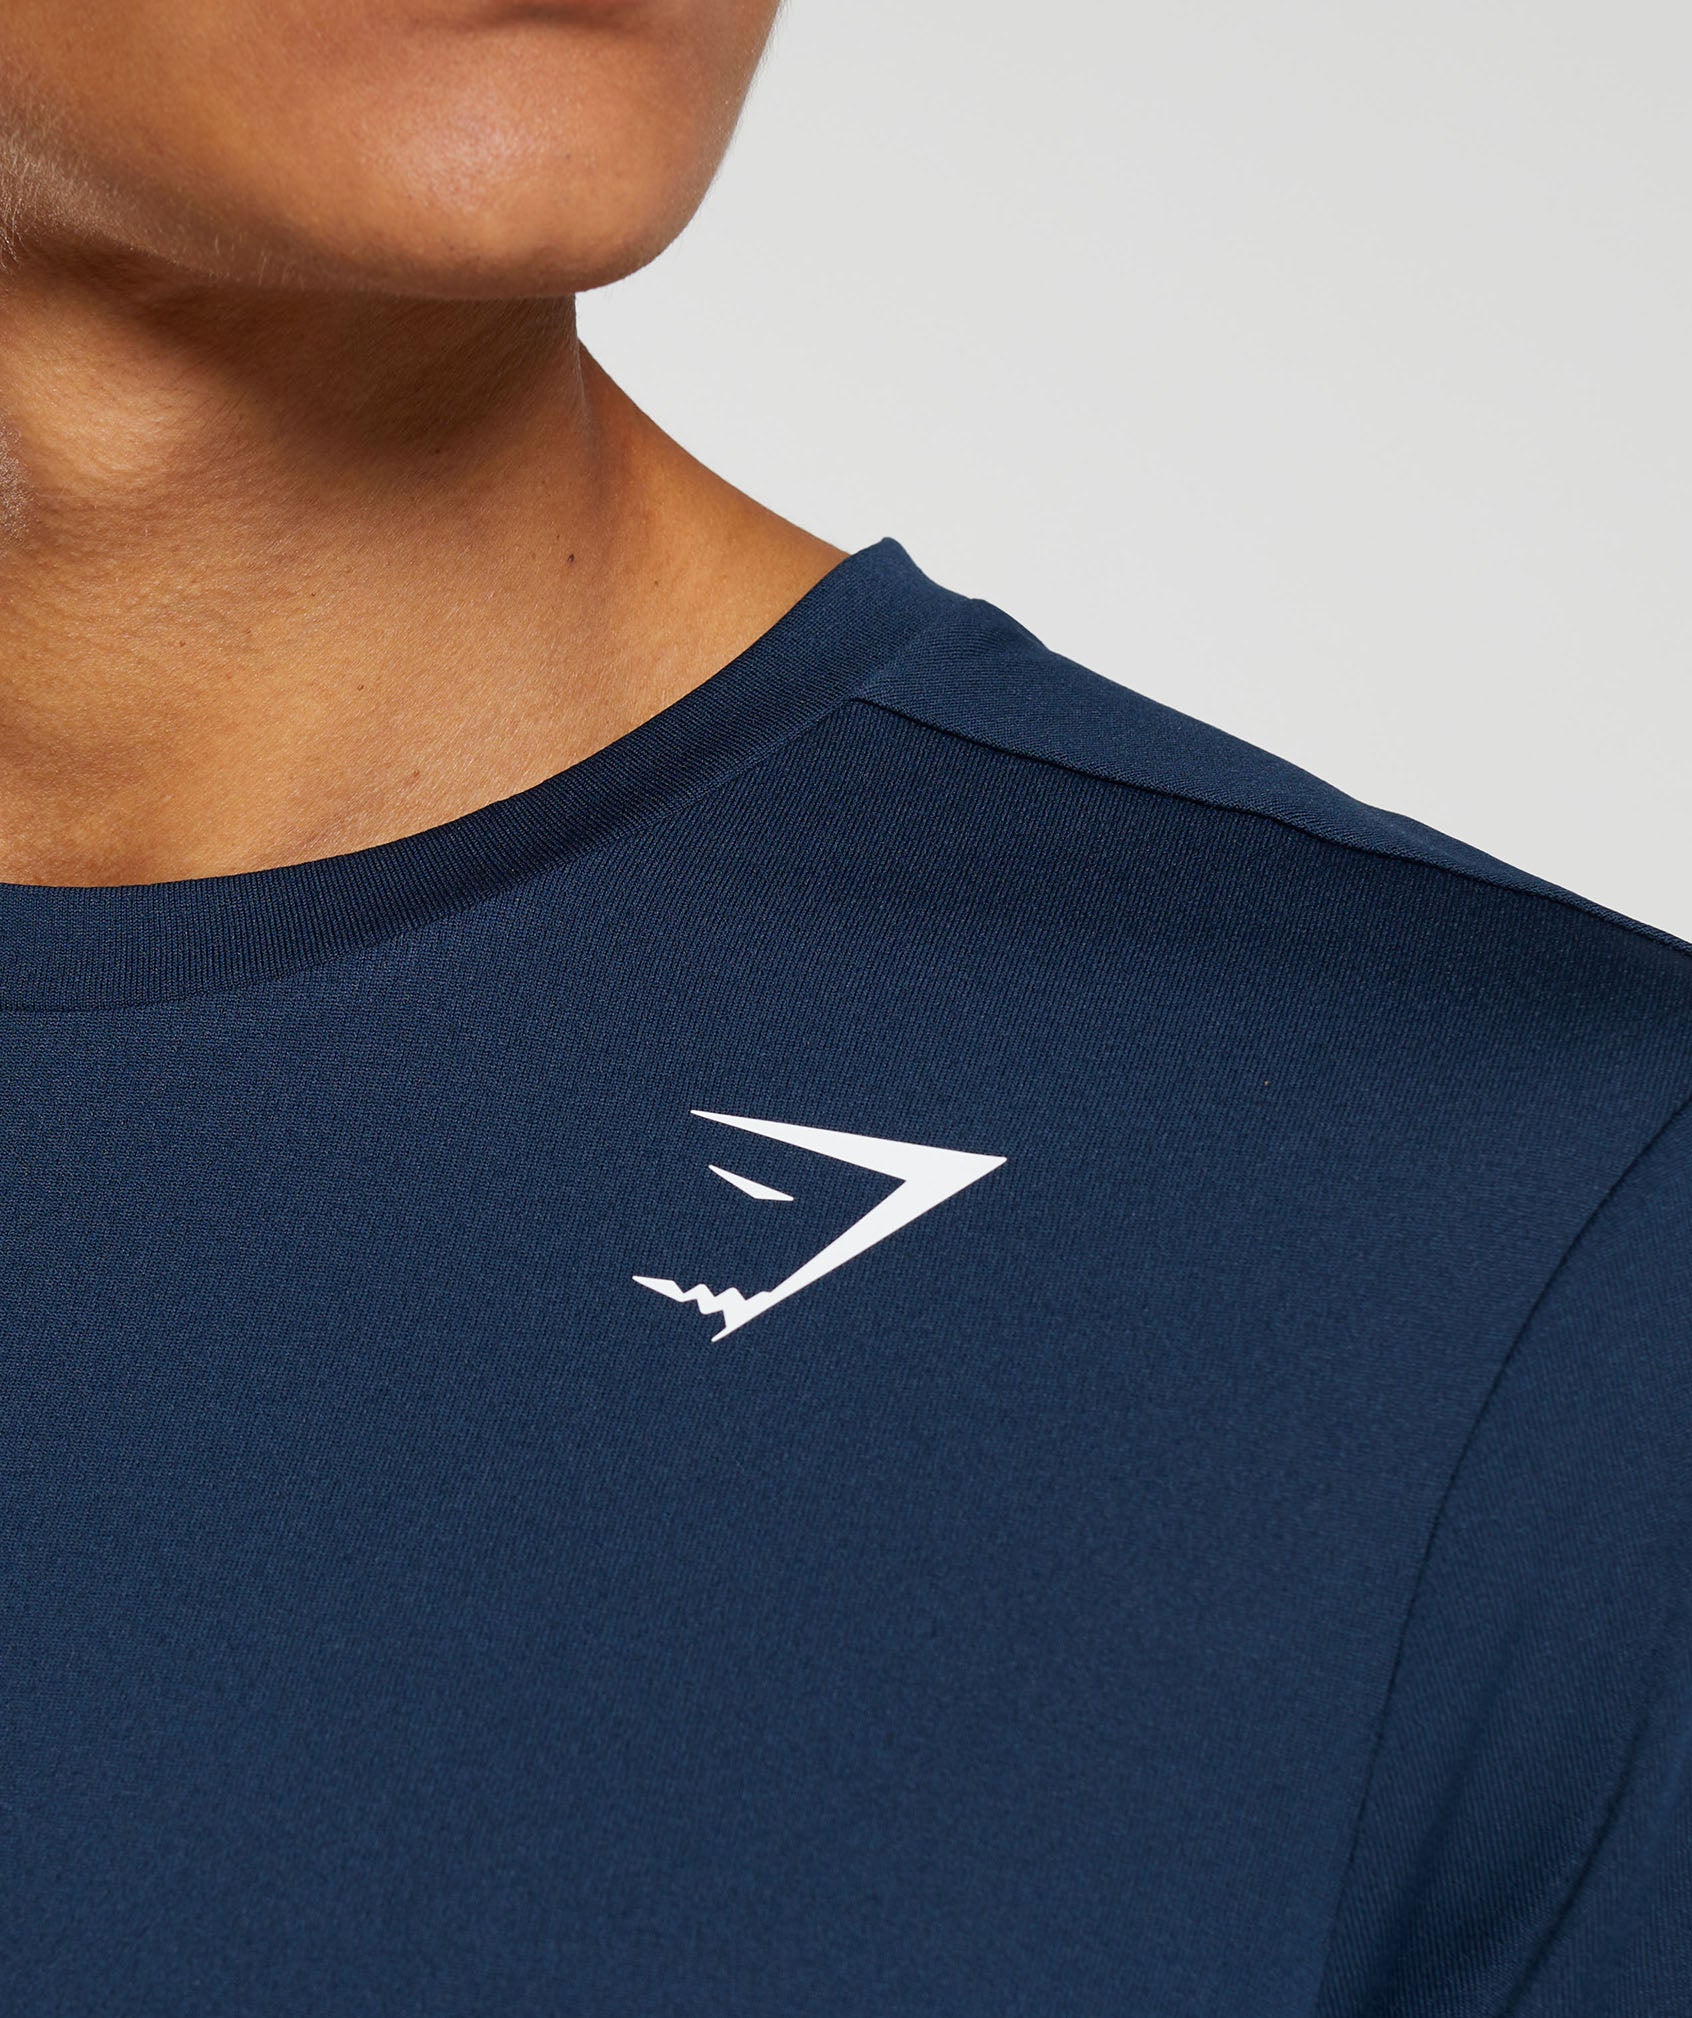 Arrival T-Shirt in Navy - view 4